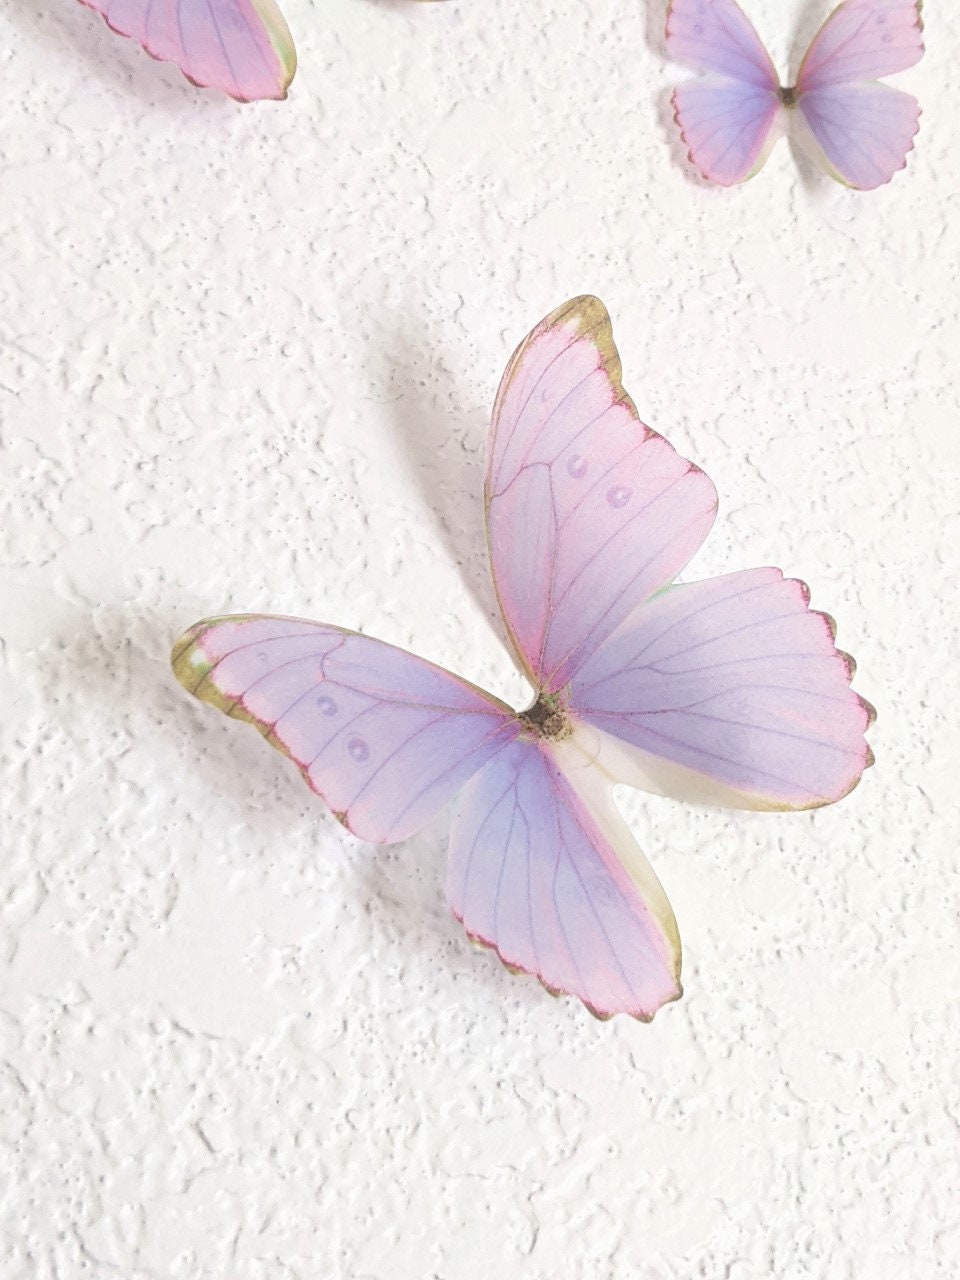 Figurine Licorne Lilac Butterfly